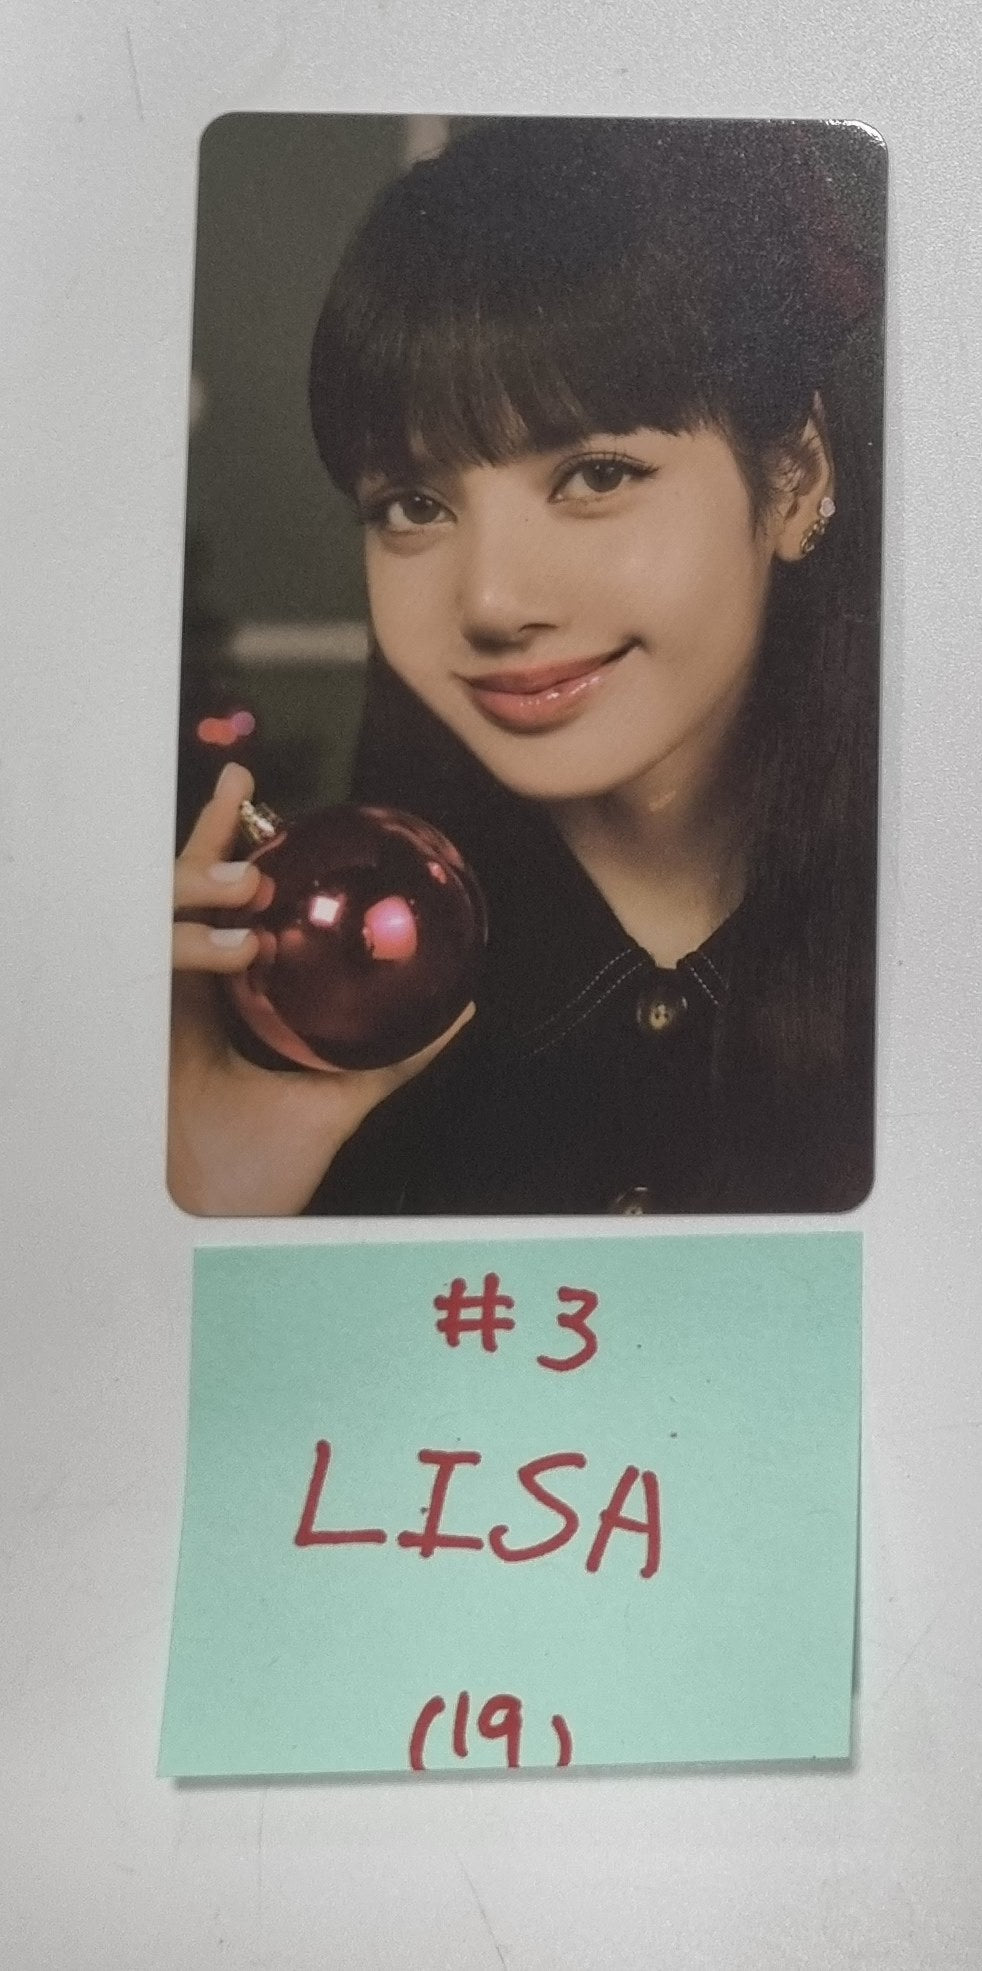 BLACKPINK「THE GAME PHOTOCARD COLLECTION CHRISTMAS EDITION」 - 公式フォトカード、二つ折りカレンダーポスター [24.1.8]